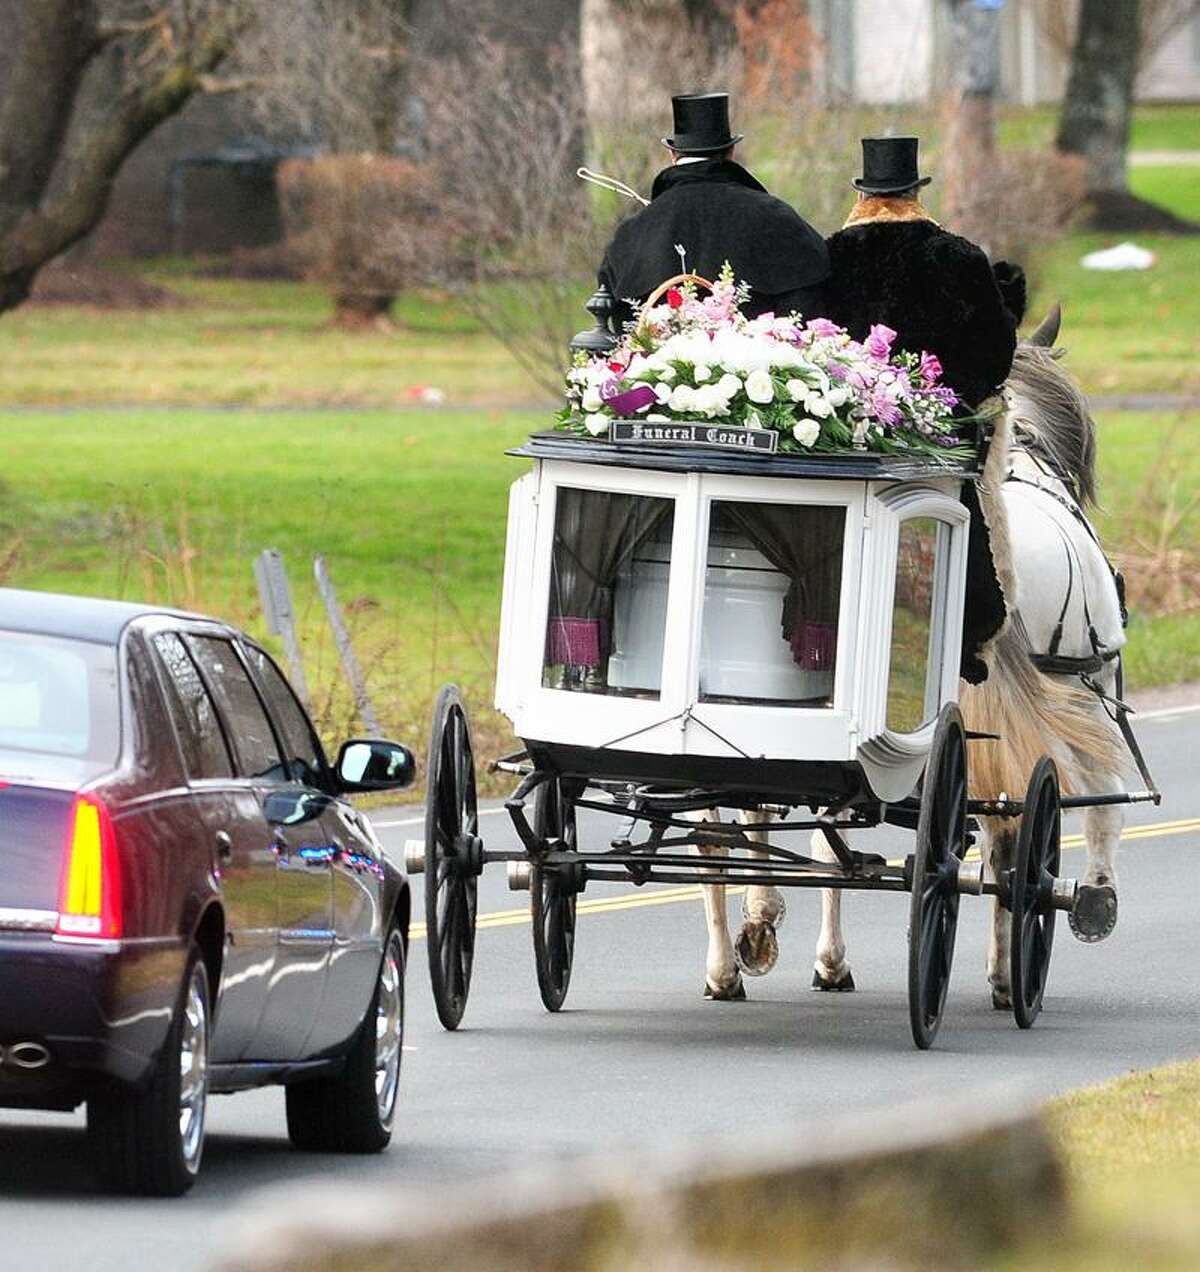 A horse drawn funeral coach carries the body of Sandy Hook Elementary School shooting victim Ana Grace Marquez-Greene from funeral services at The First Cathedral in Bloomfield on 12/22/2012. On the carriage are Randy Franklin (left) and John Allegra (right) of Allegra Farm. Photo by Arnold Gold/New Haven Register